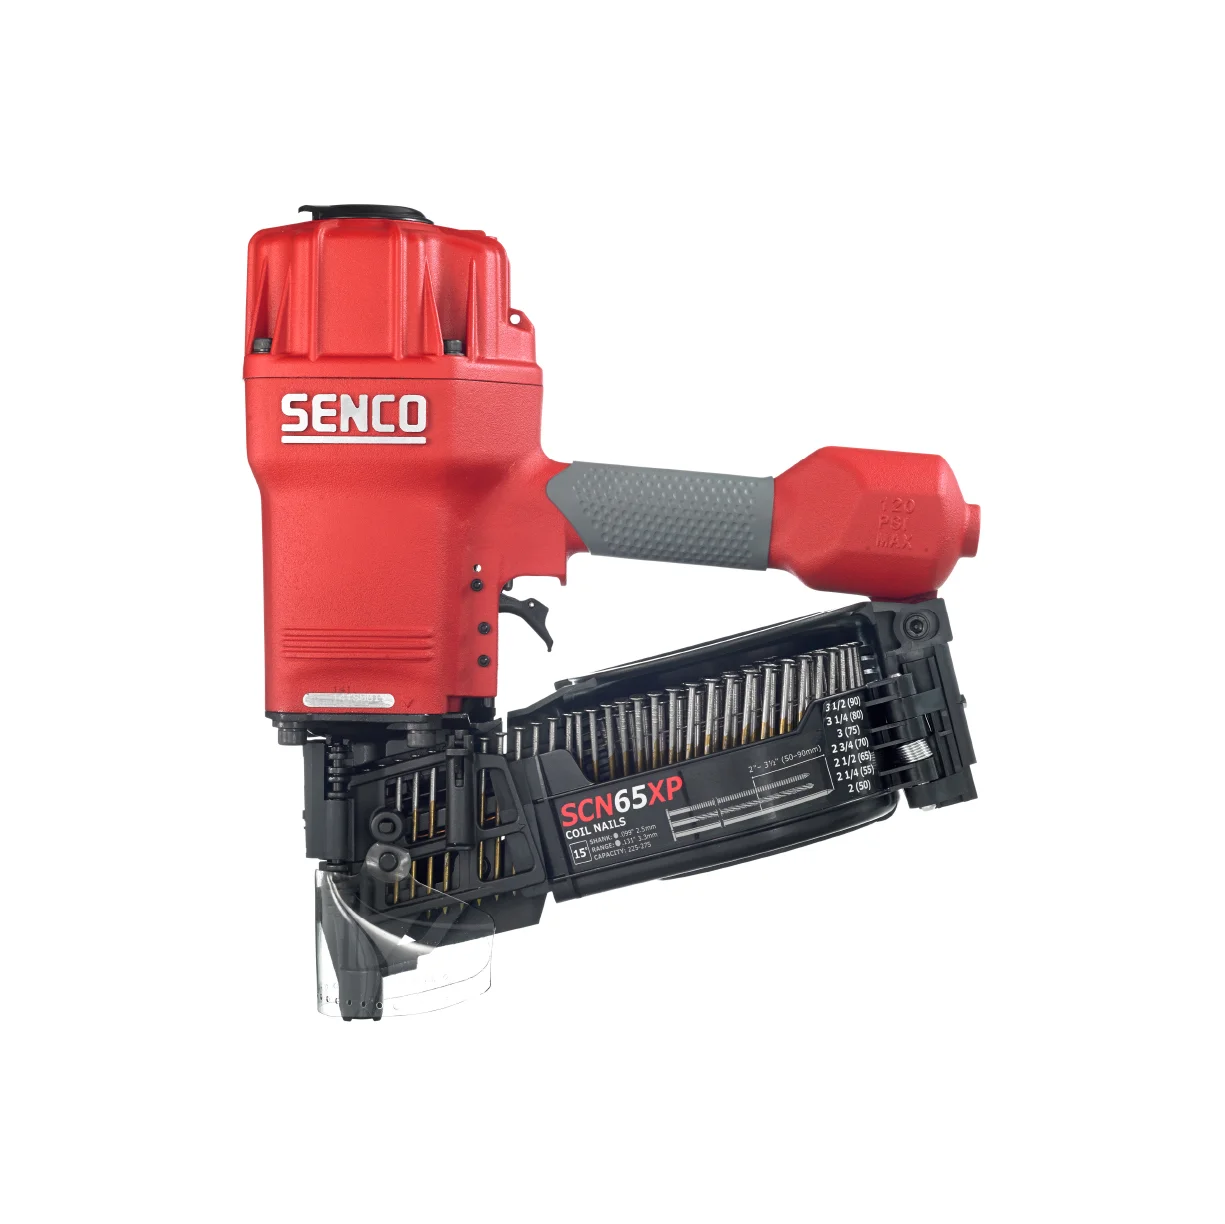 SENCO 8V0001N 1-3/4 inch Angle Wire Coil Nailer for sale online 